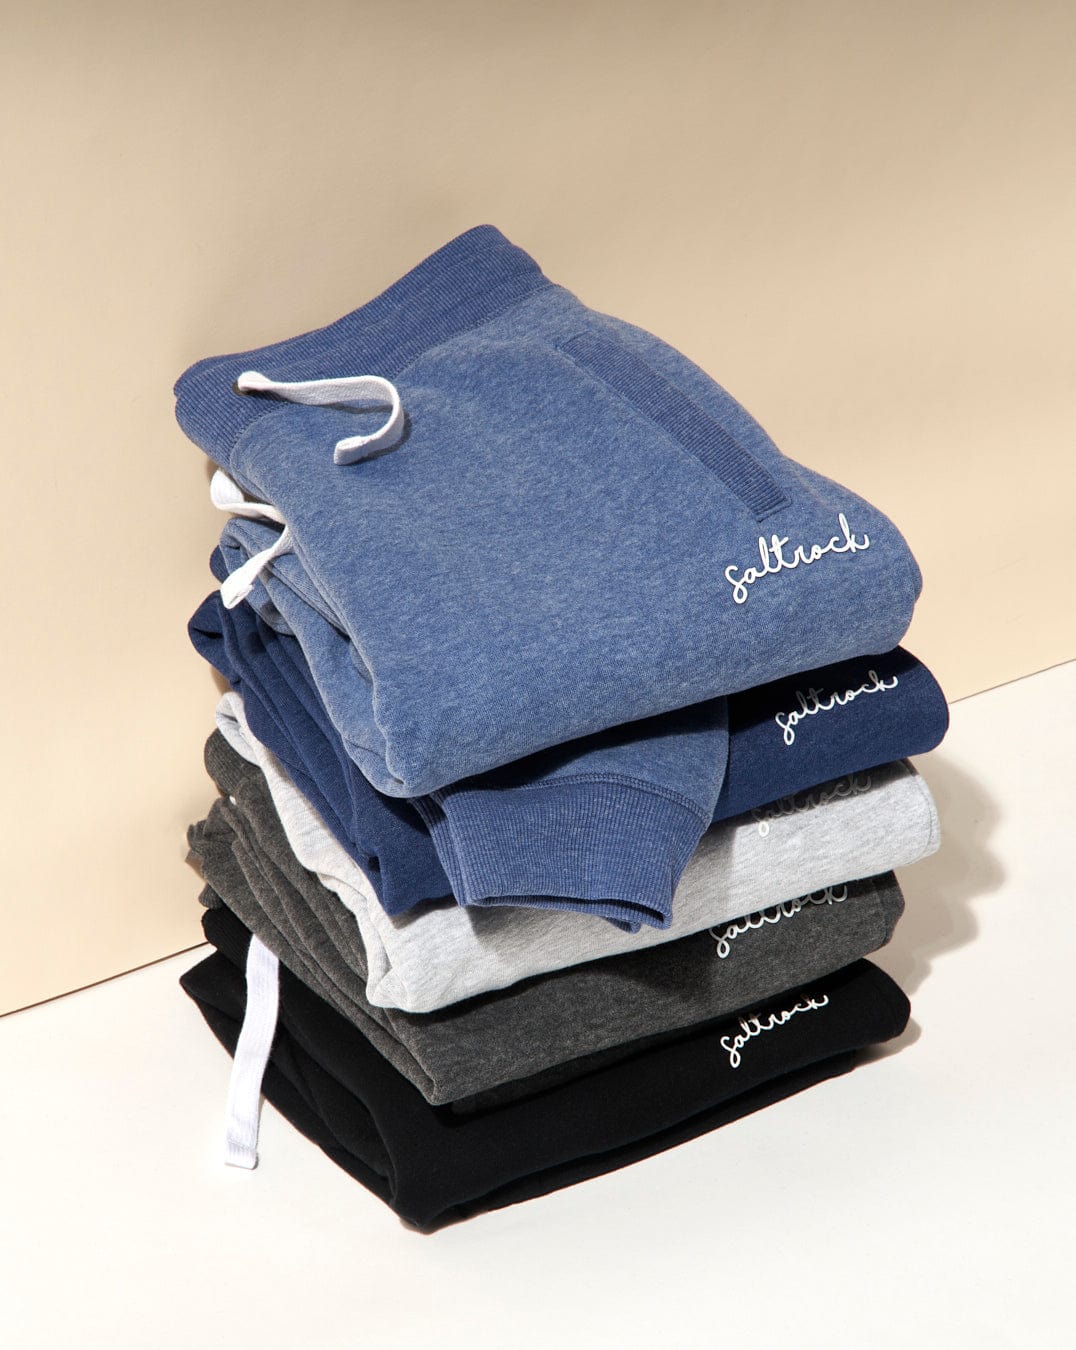 A stack of Saltrock's core classic Velator - Womens Jogger - Blue sweatpants in grey, blue, and black.